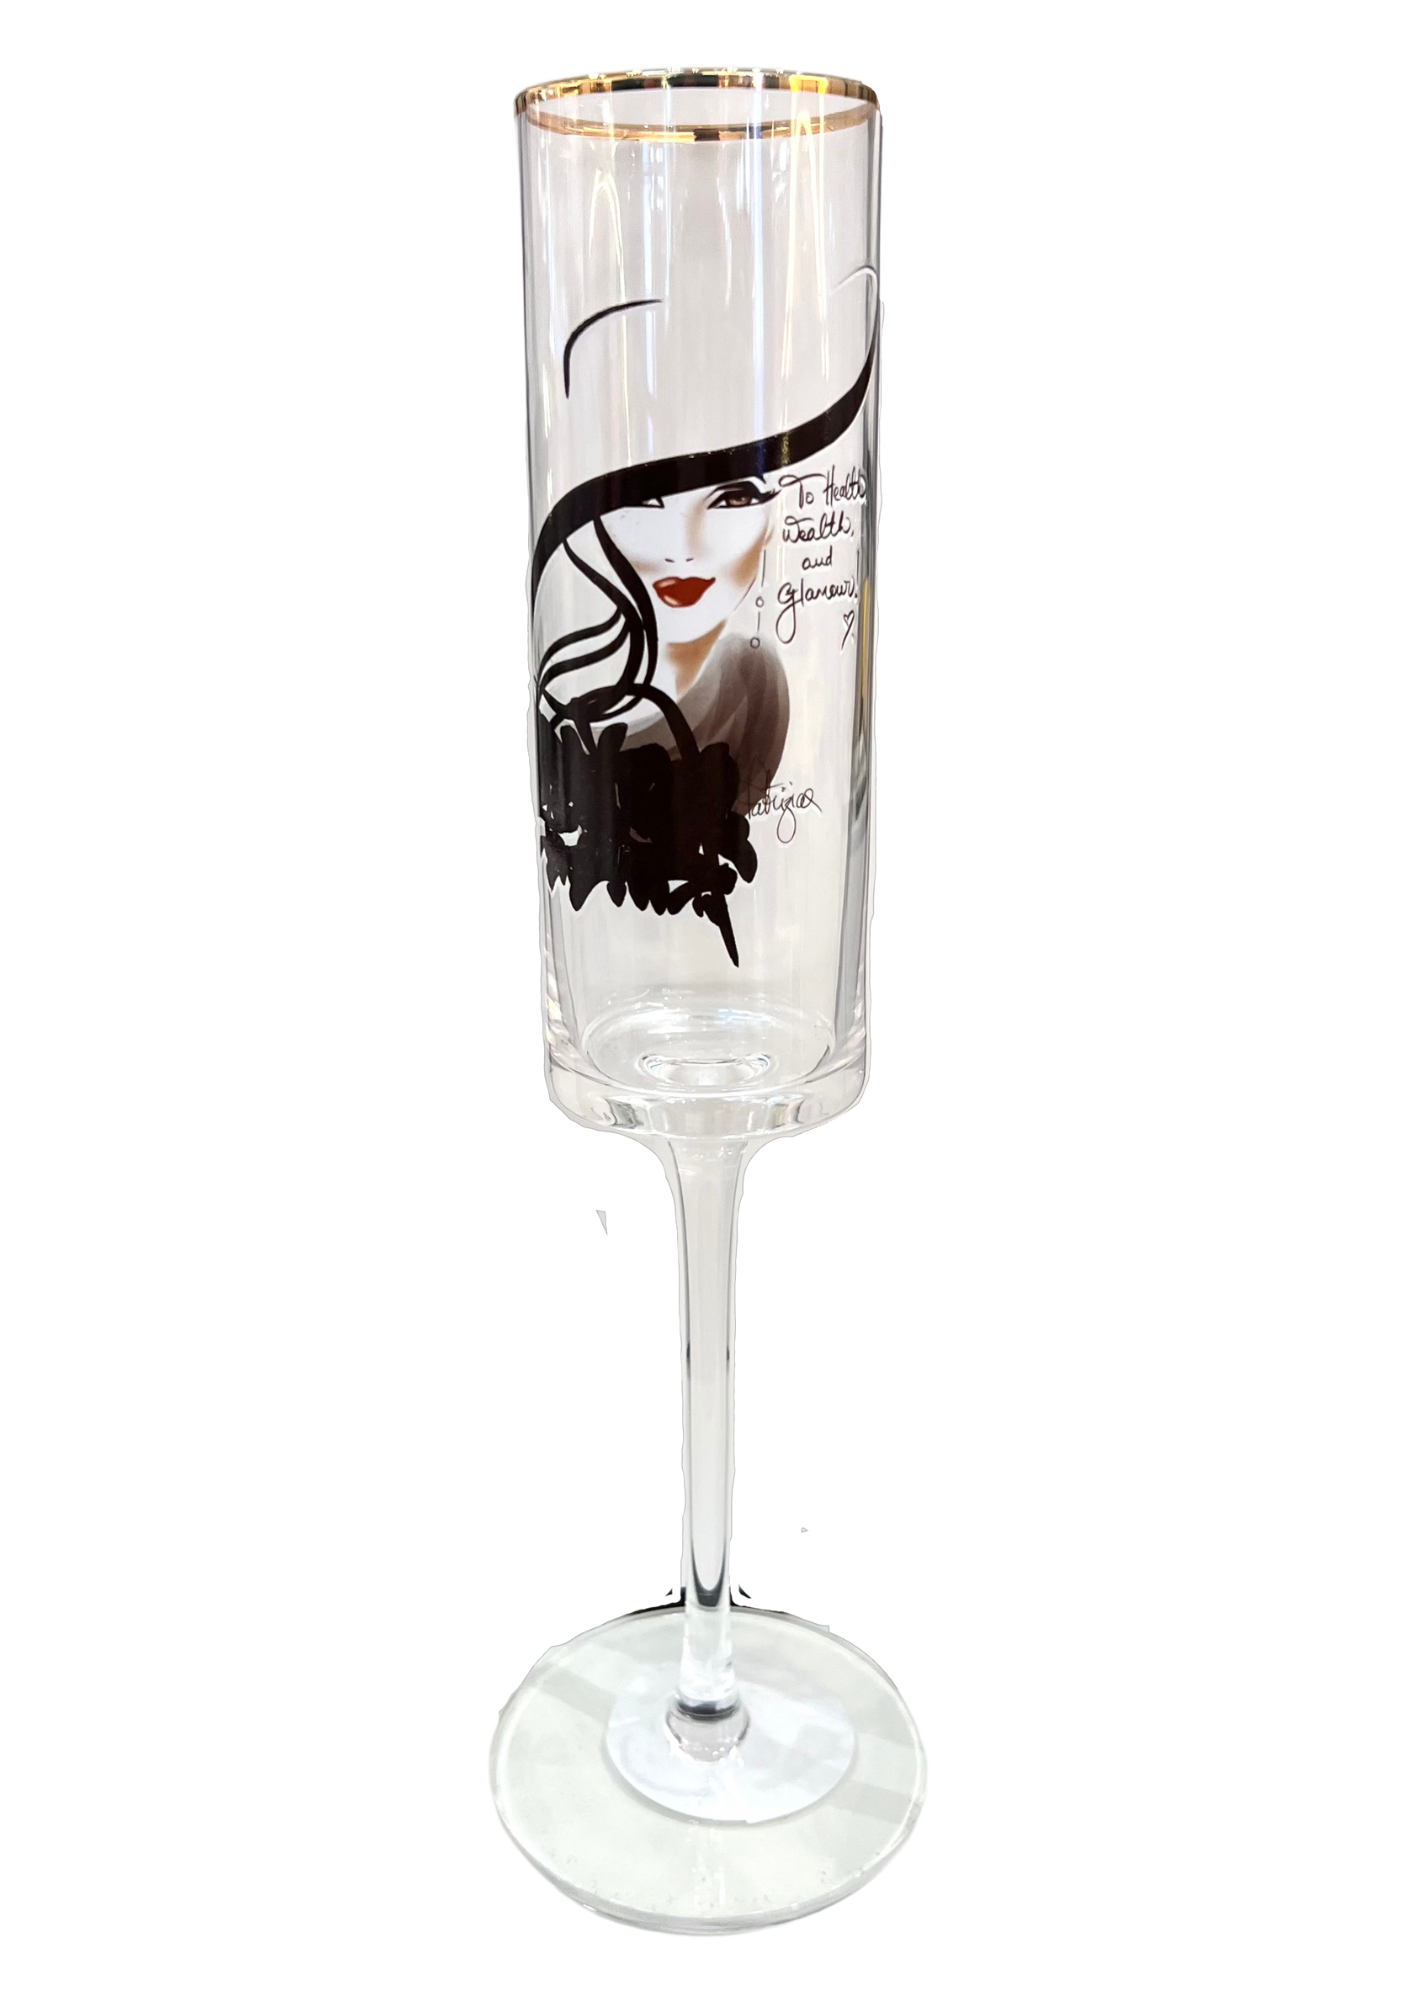 GLAM CHAMPAGNE FLUTE - GOOD TIMES